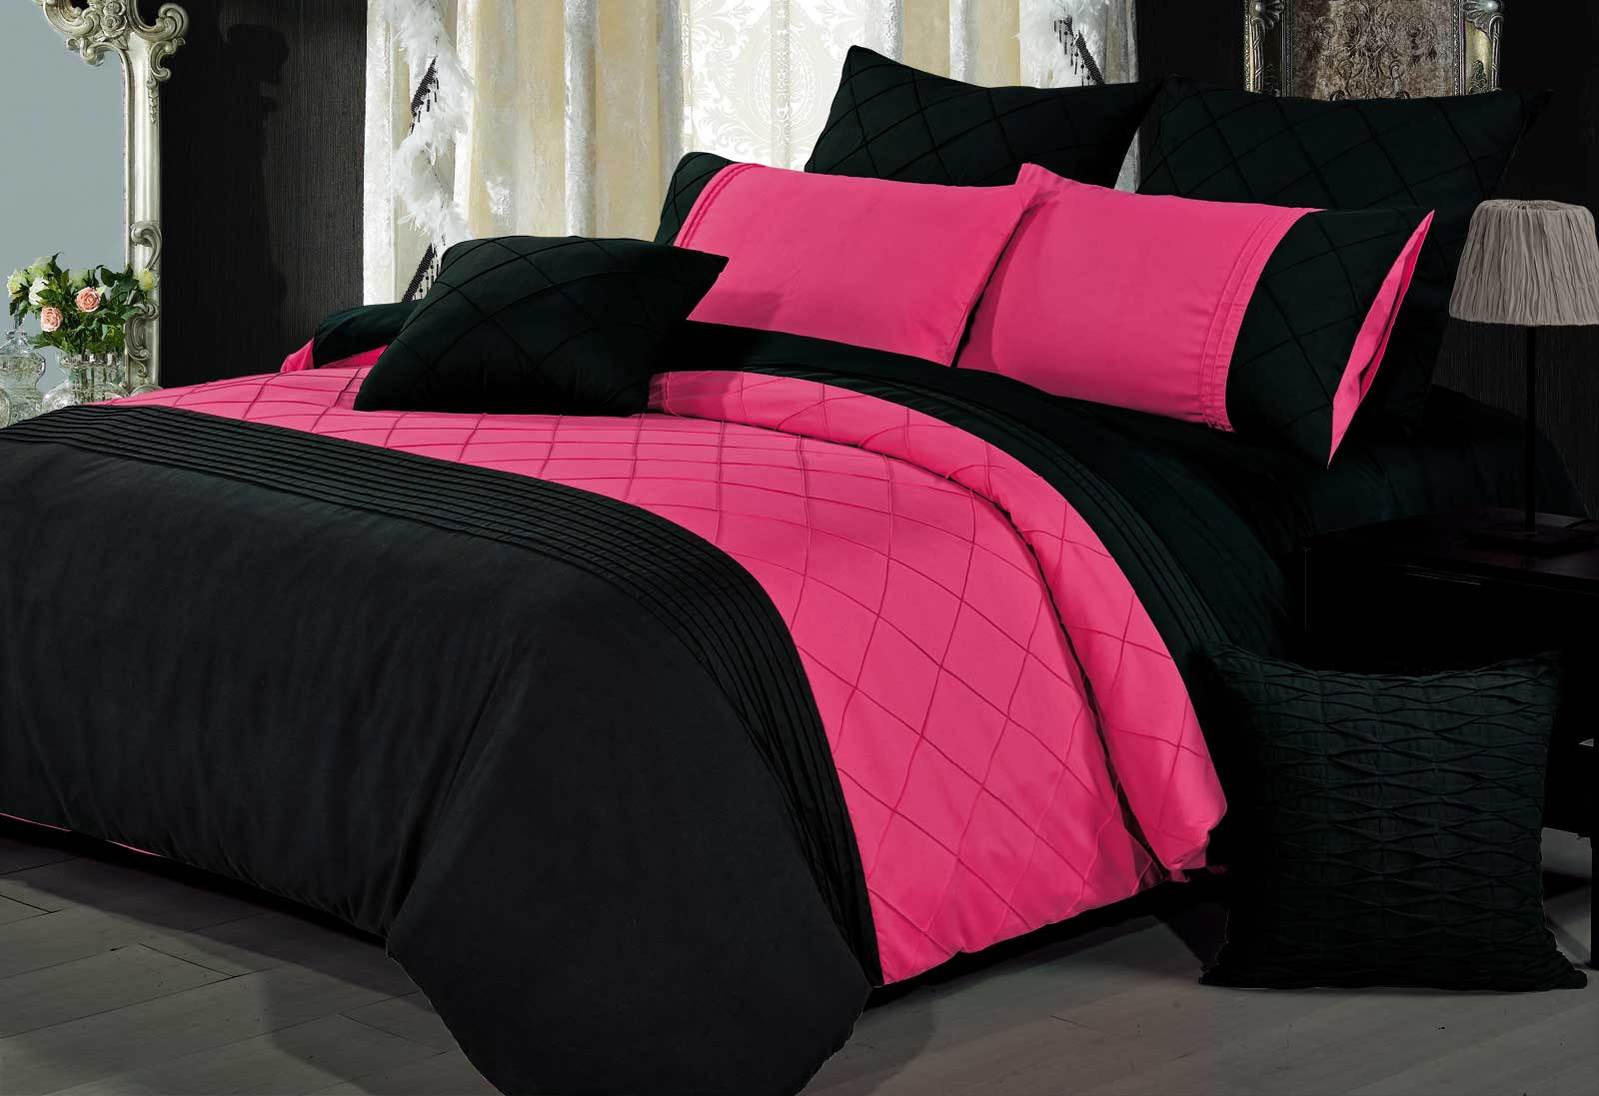 Luxton King Size Hot Pink Diamond Pintuck Quilt Cover Set(3PCS)